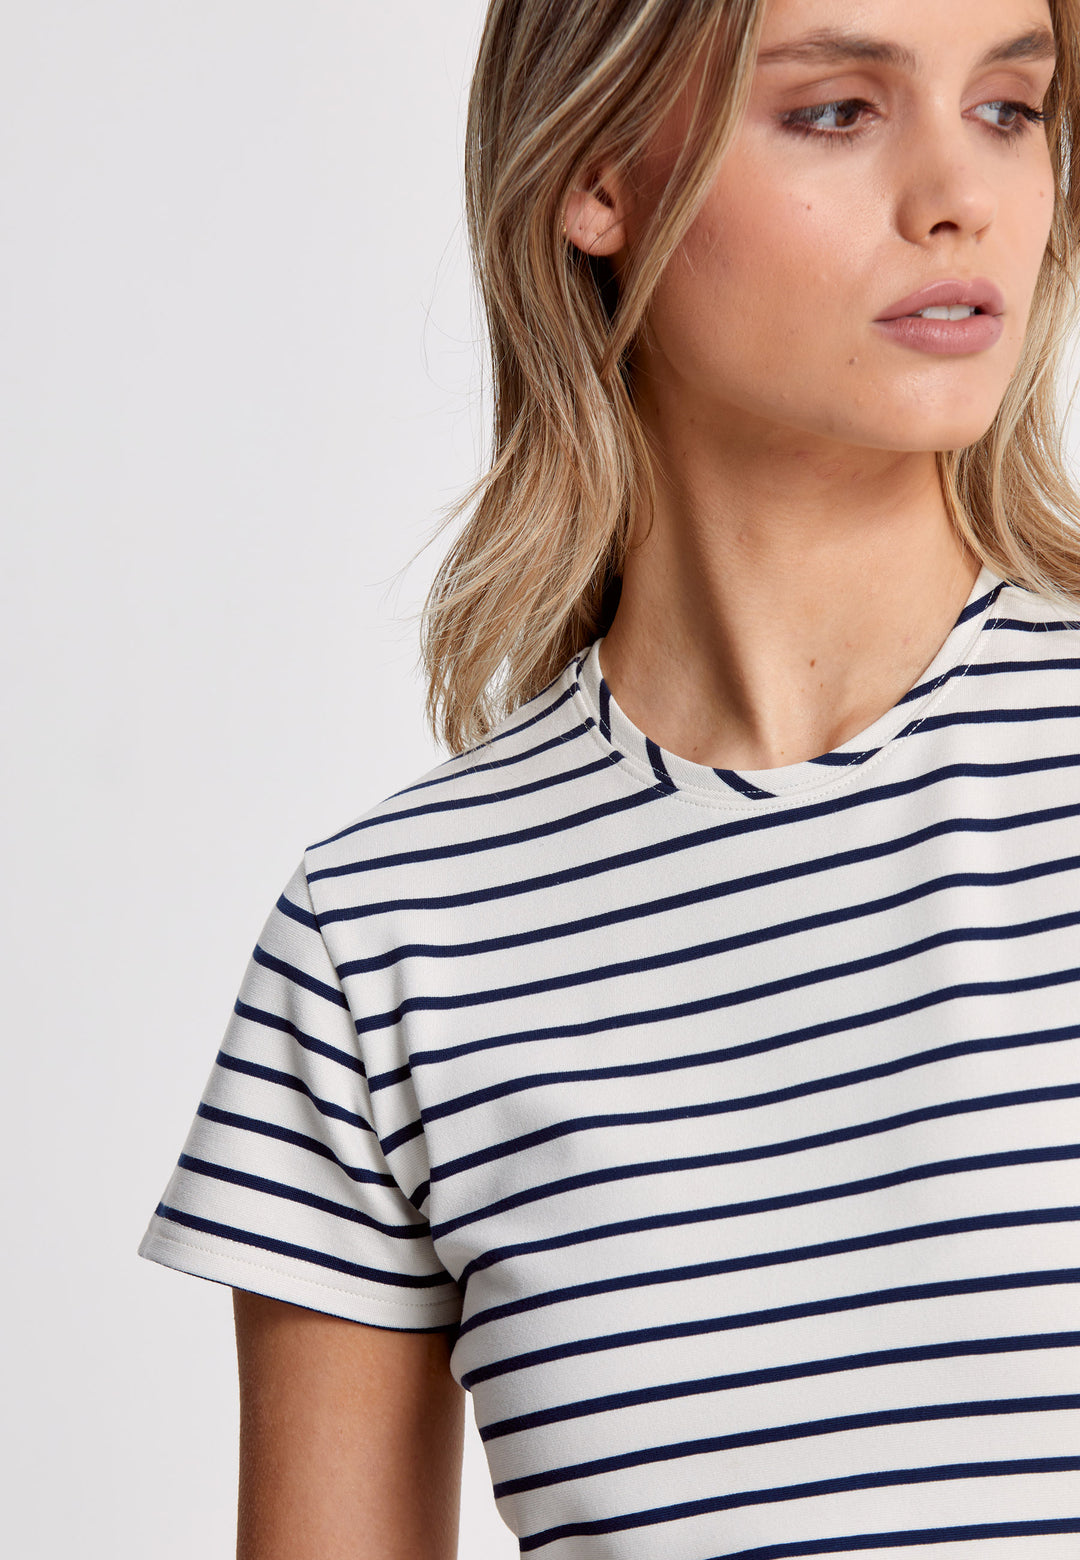 This luxurious rendition of the timeless T-shirt is crafted from premium stretch jersey and boasts a refined round neck, cementing its place as a must-have essential. Now available in a sophisticated navy and ecru stripe.